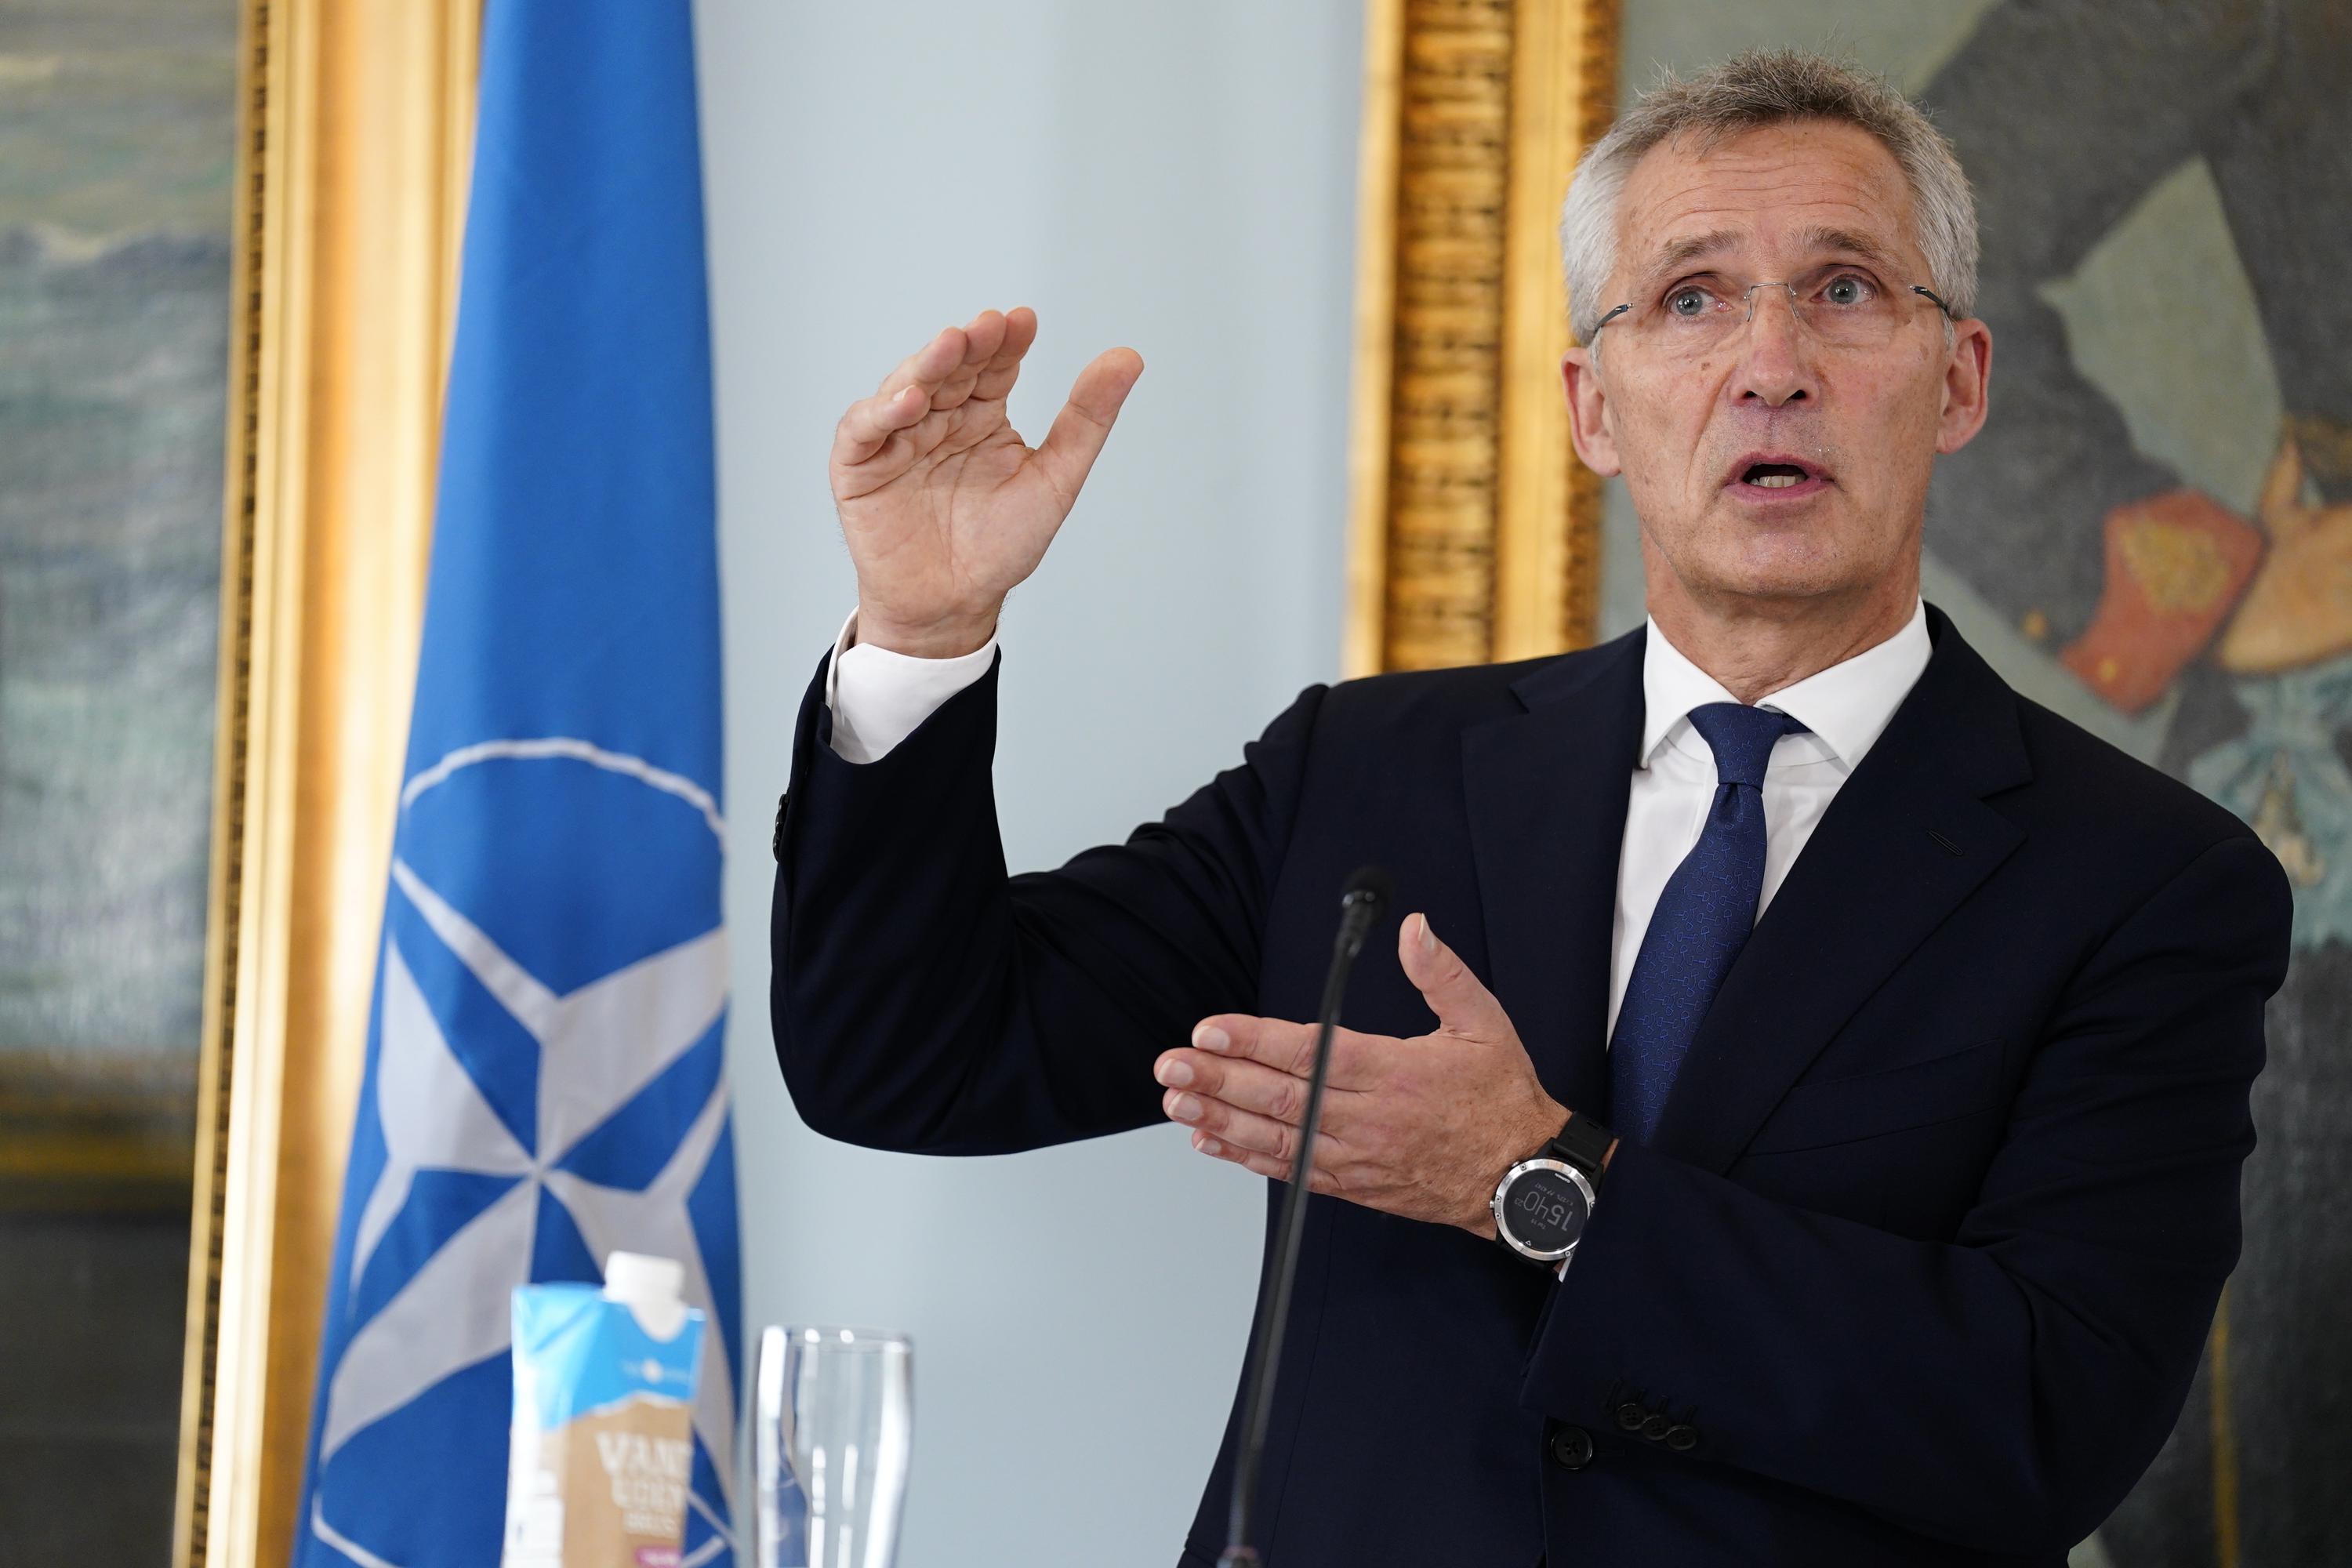 NATO chief sure spat over Sweden Finland will be resolved – The Associated Press